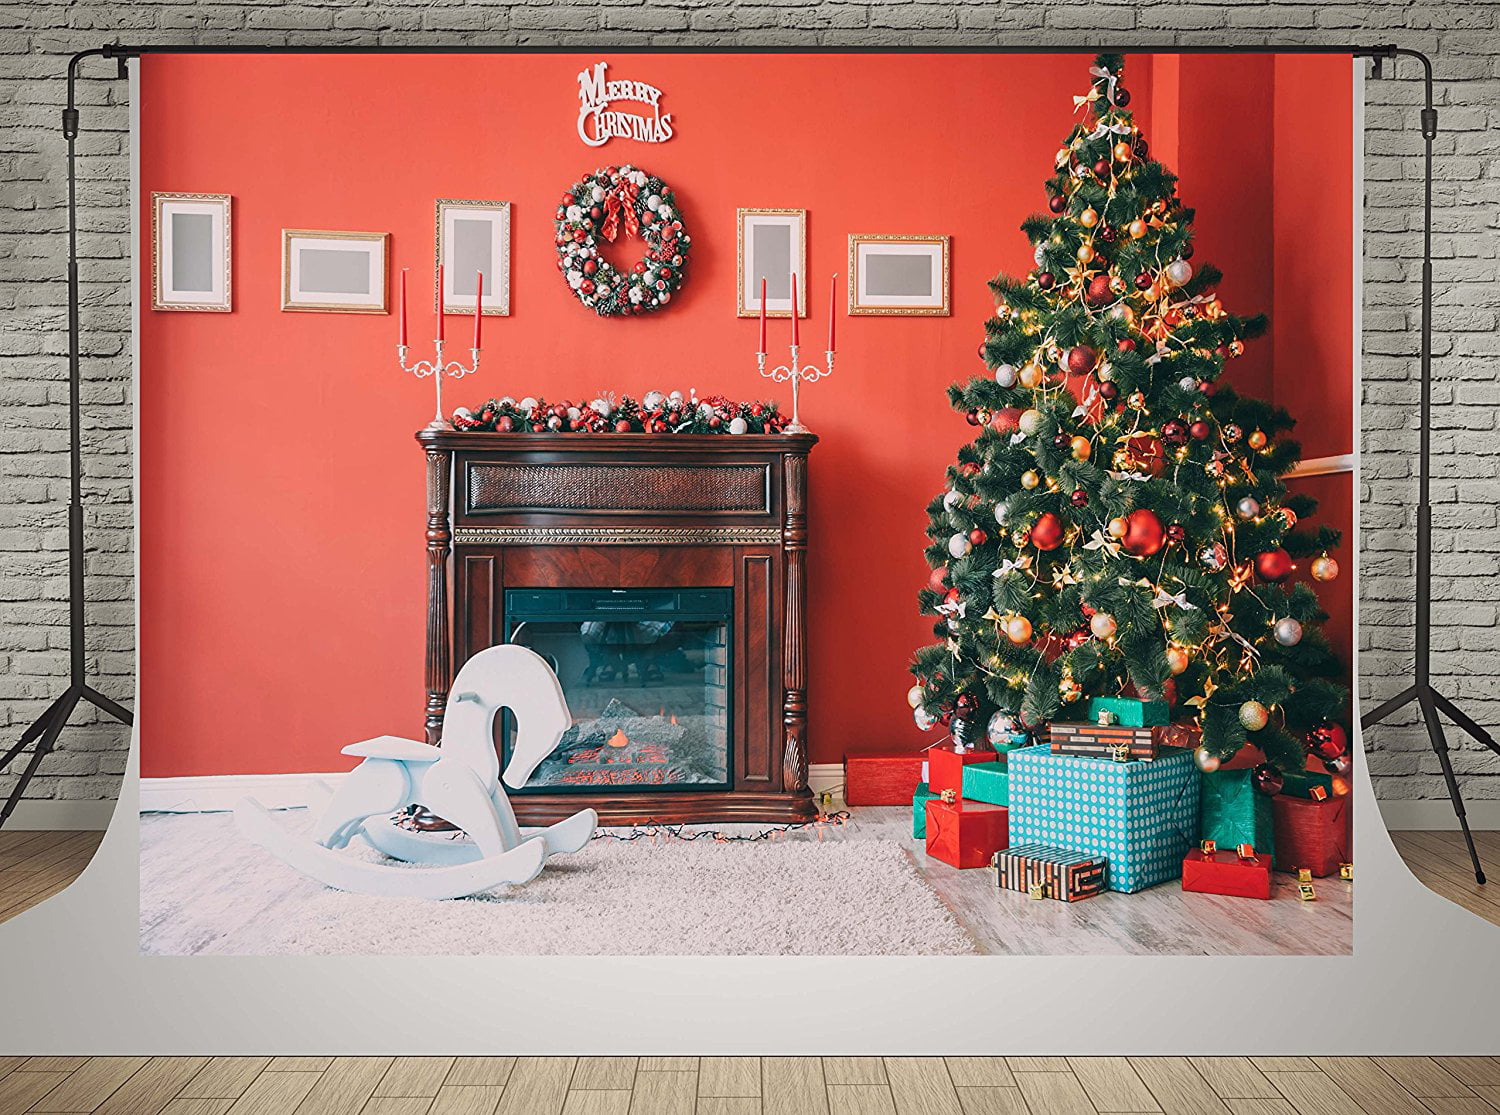 5x7ft Christmas Tree Wooden Floor Photography Background Computer-Printed Vinyl Backdrops 